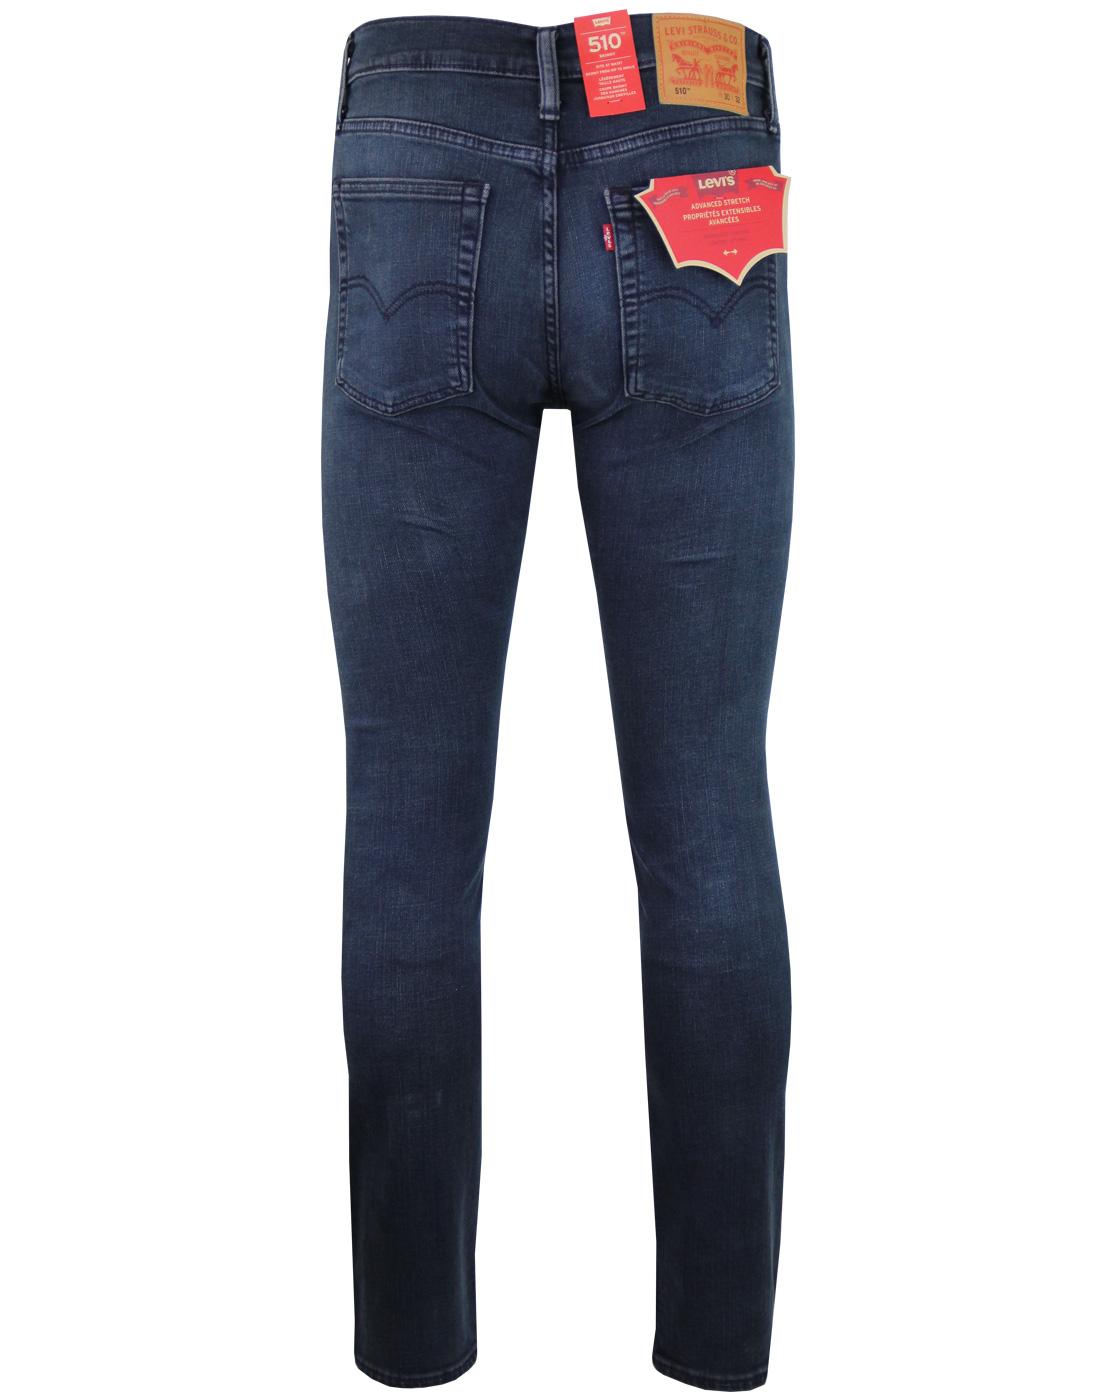 LEVI'S 510 Retro Indie Mod Skinny Fit Jeans in Eyser Blue